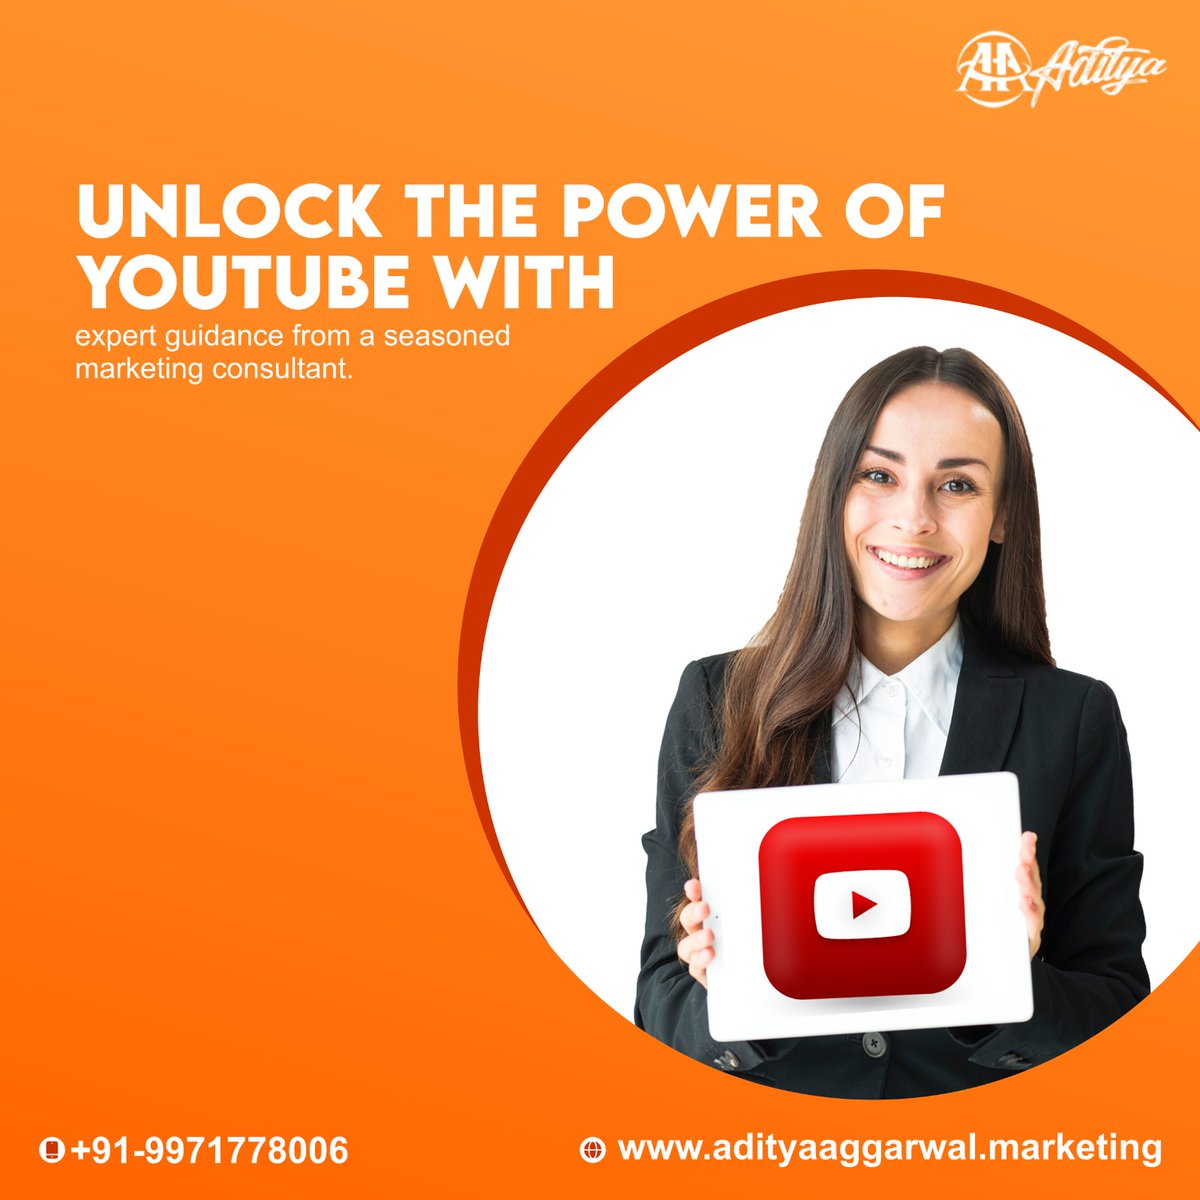 Unlock the power of YouTube with expert guidance from a seasoned marketing consultant.
#youtubeexpert #marketingconsultant #youtubemarketingconsultant #youtube #adityaaggarwal